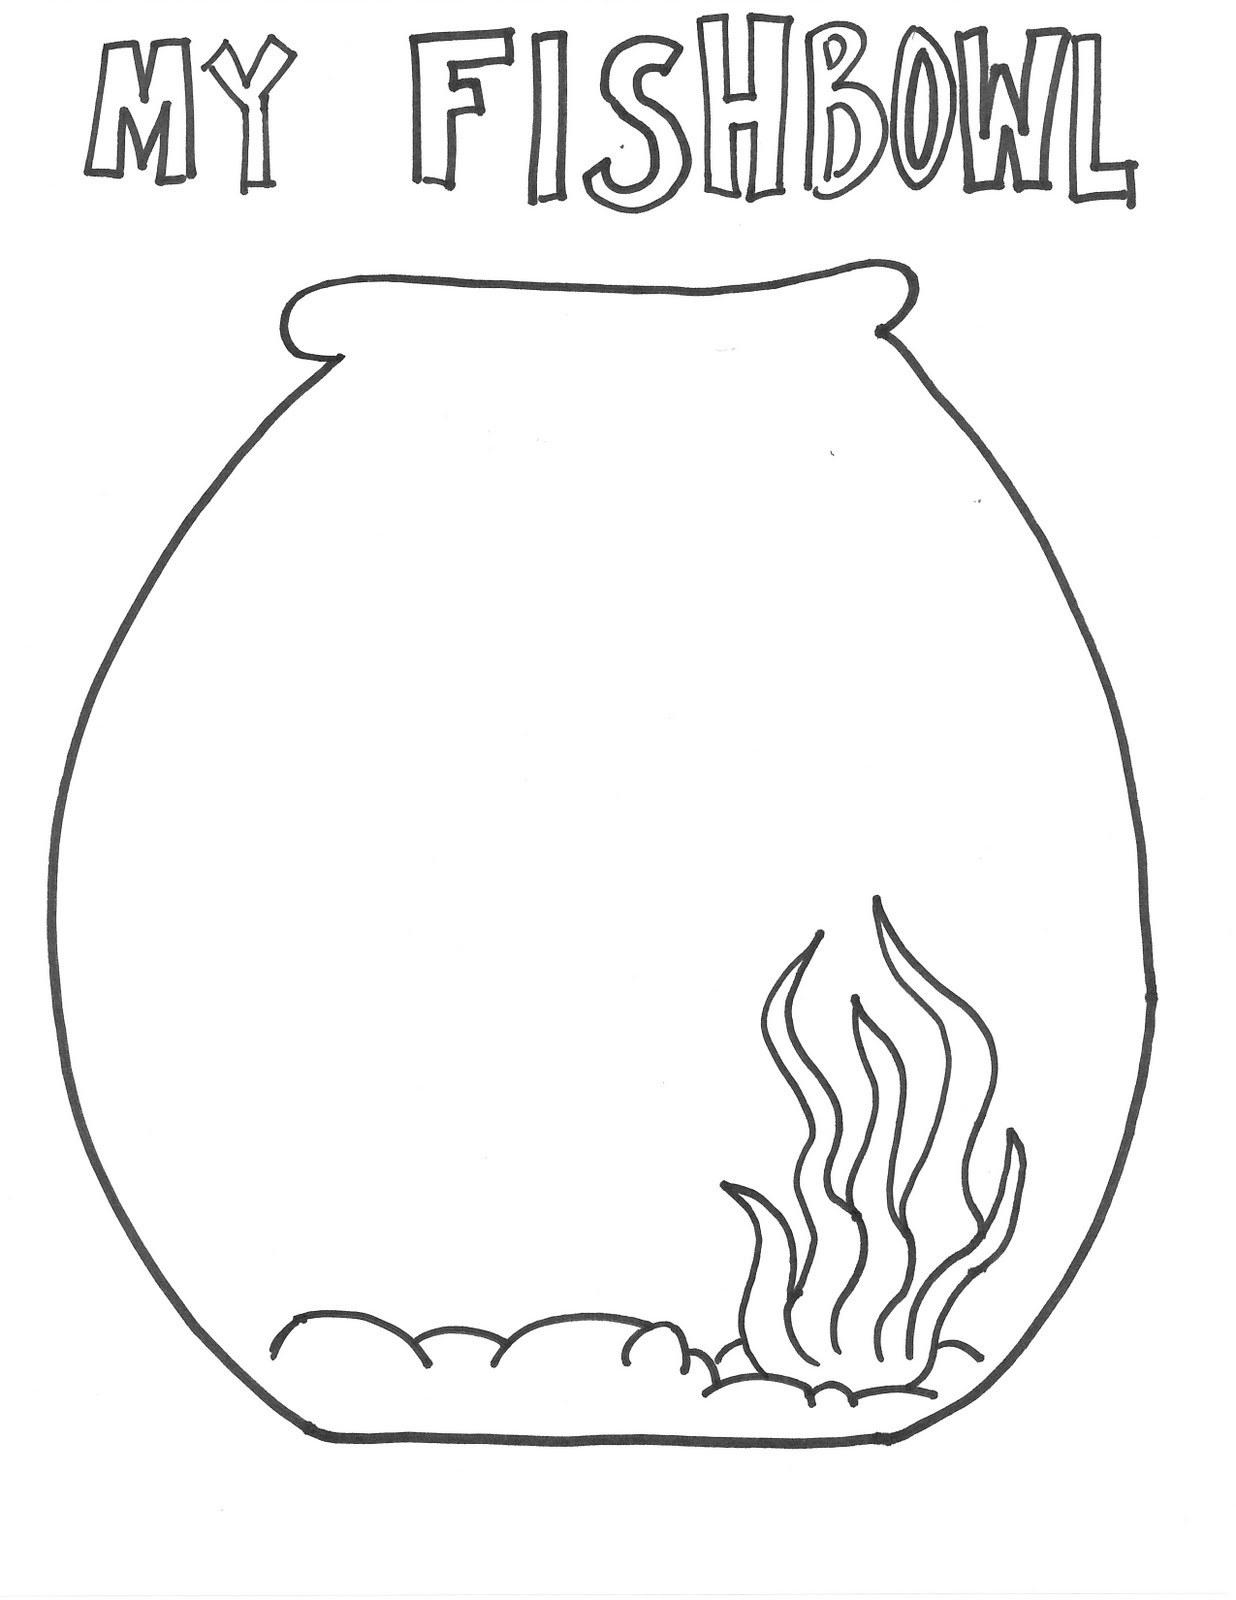 Fish bowl free fishbowl coloring pages clipart